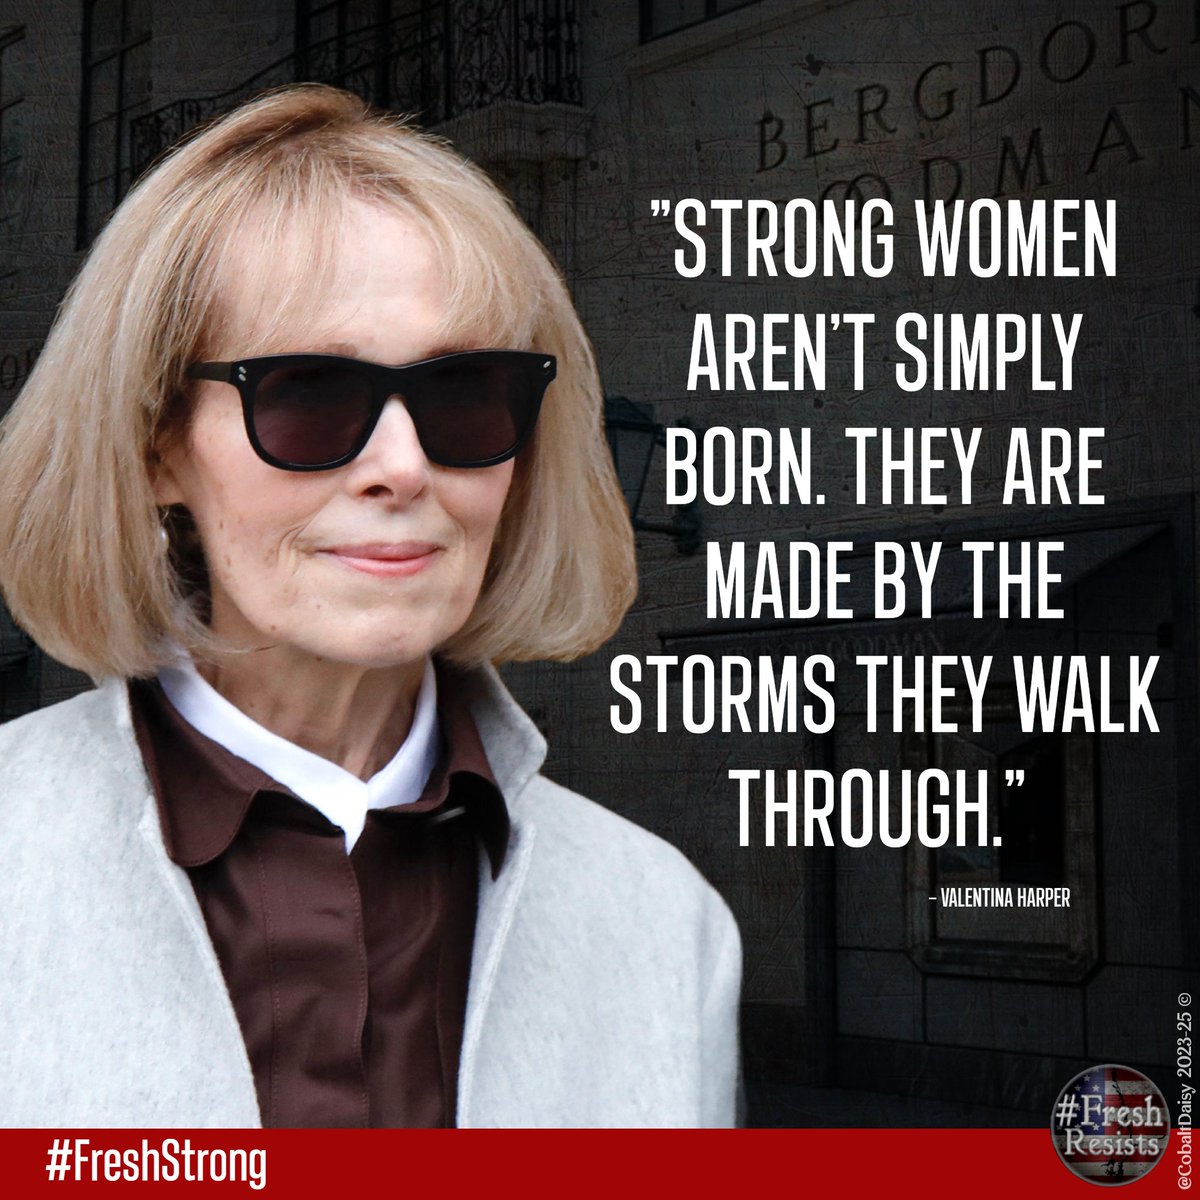 We only get strong by walking through storms and fire. #StrongWomen will hold Trump accountable. 

The verdict is in:
Emotional harm - $7.3M  
Reputation damage - $11M  
Punitive charges - $65M  Total - $83.3M

#FreshStrong #EJeanCarroll #TrumpIsALoser